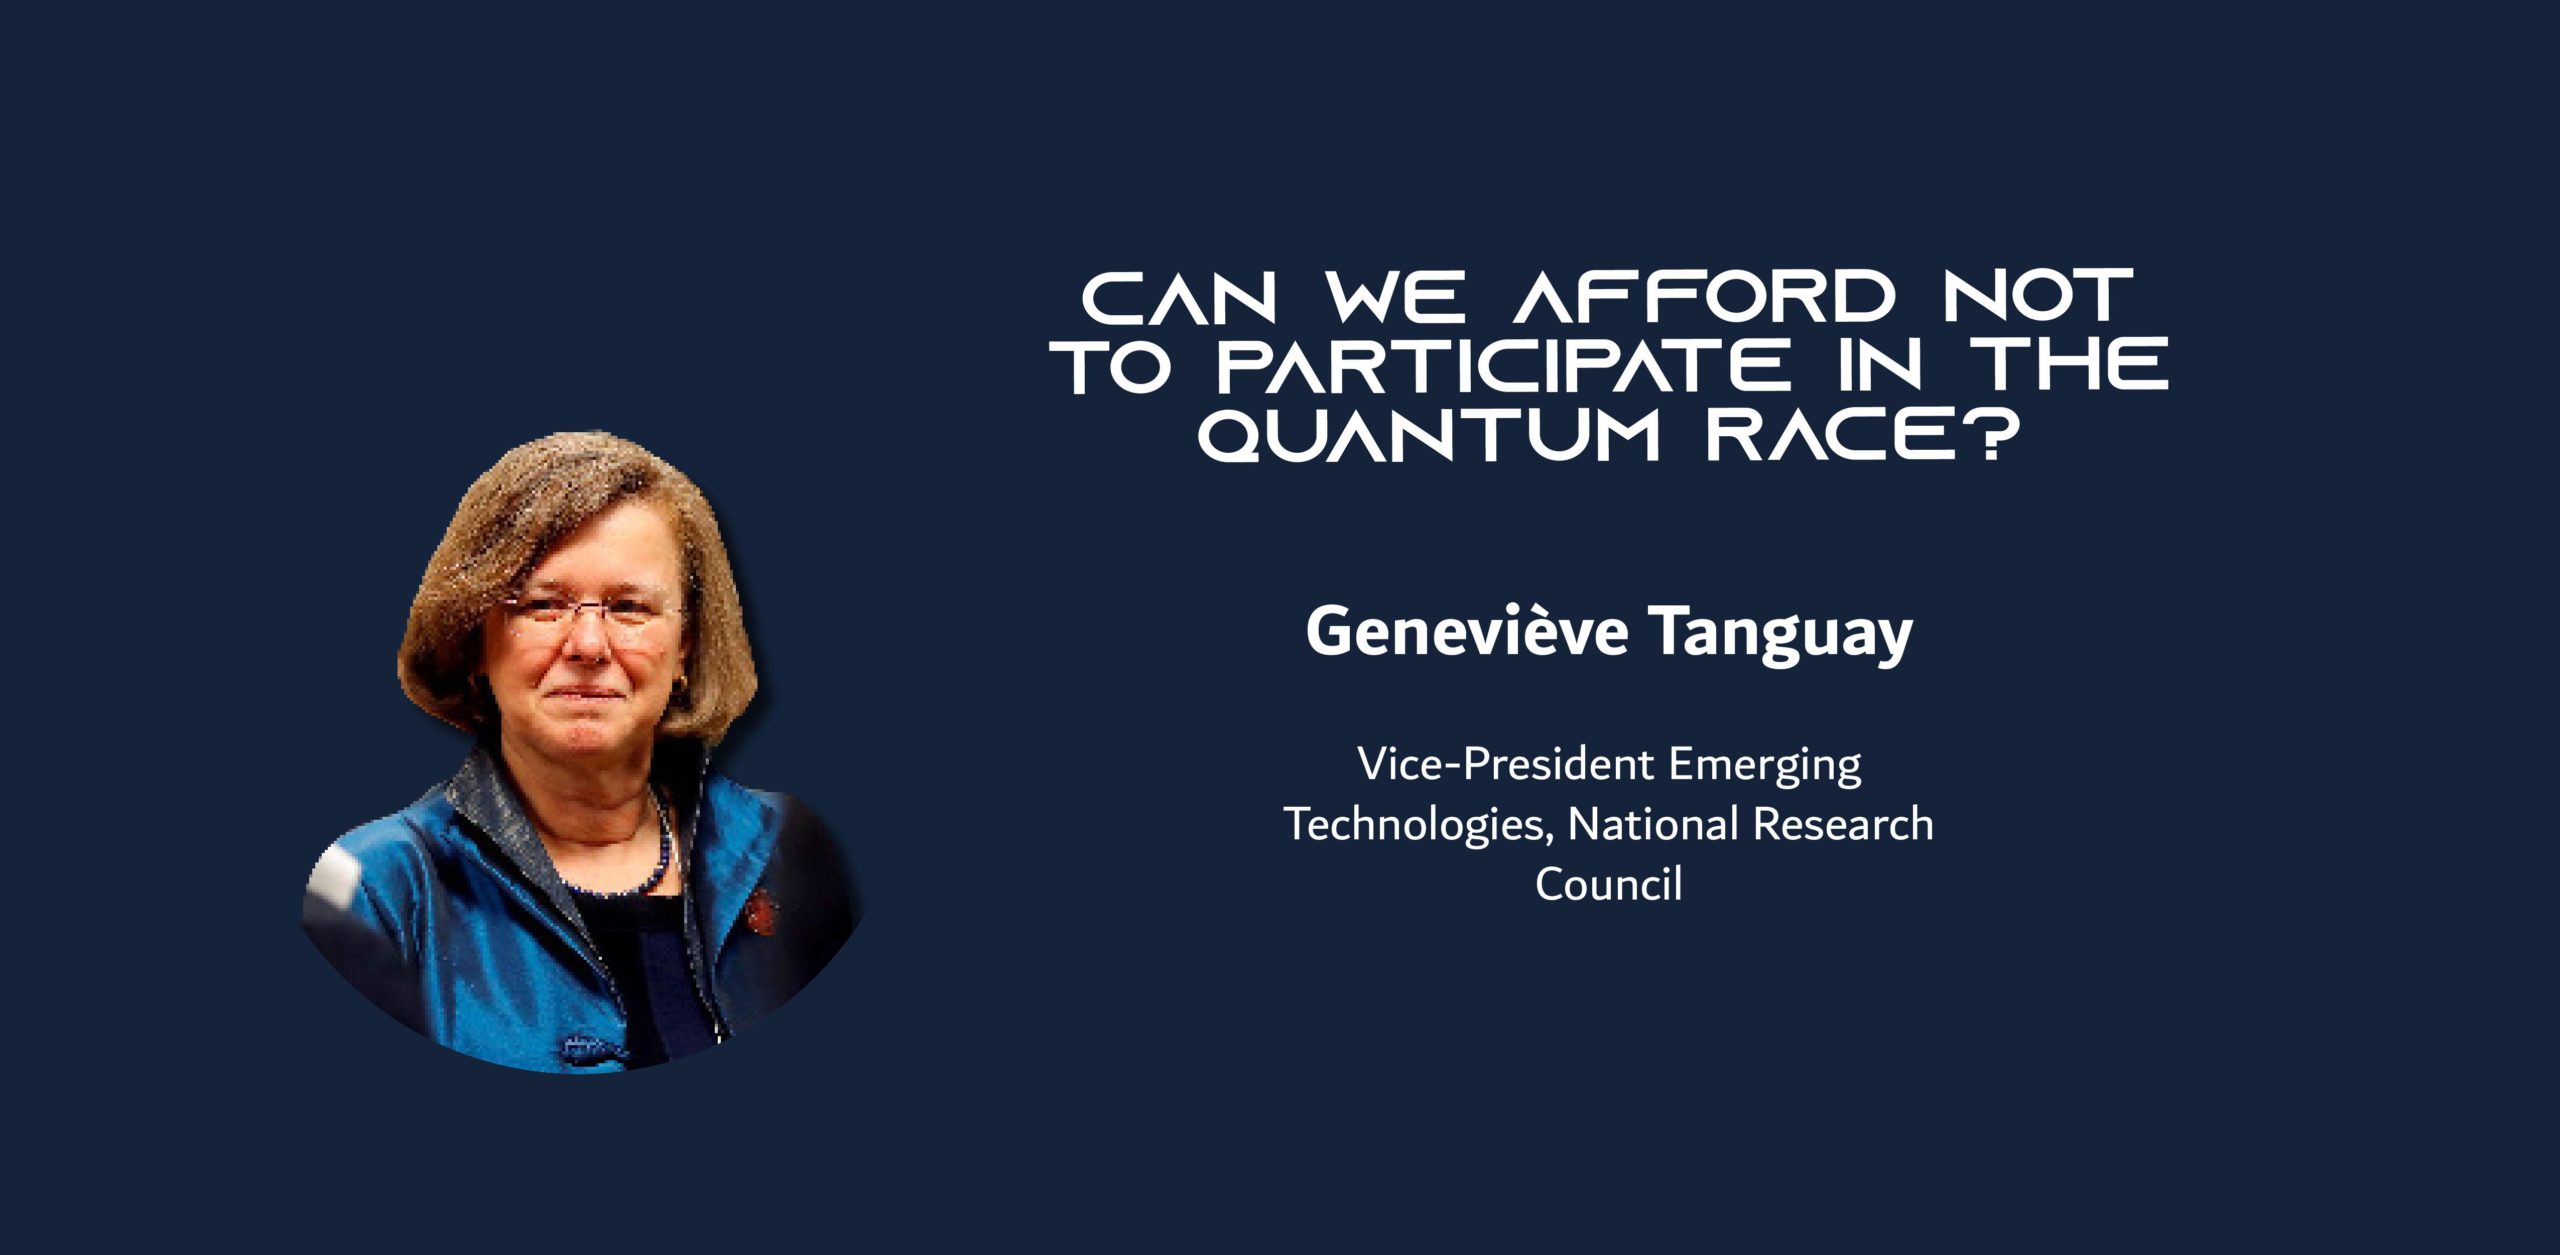 A photo of a woman on a blue background with the text: Can we afford not to participate in the quantum race? Geneviève Tanguay Vice-President Emerging Technologies, National Research Council